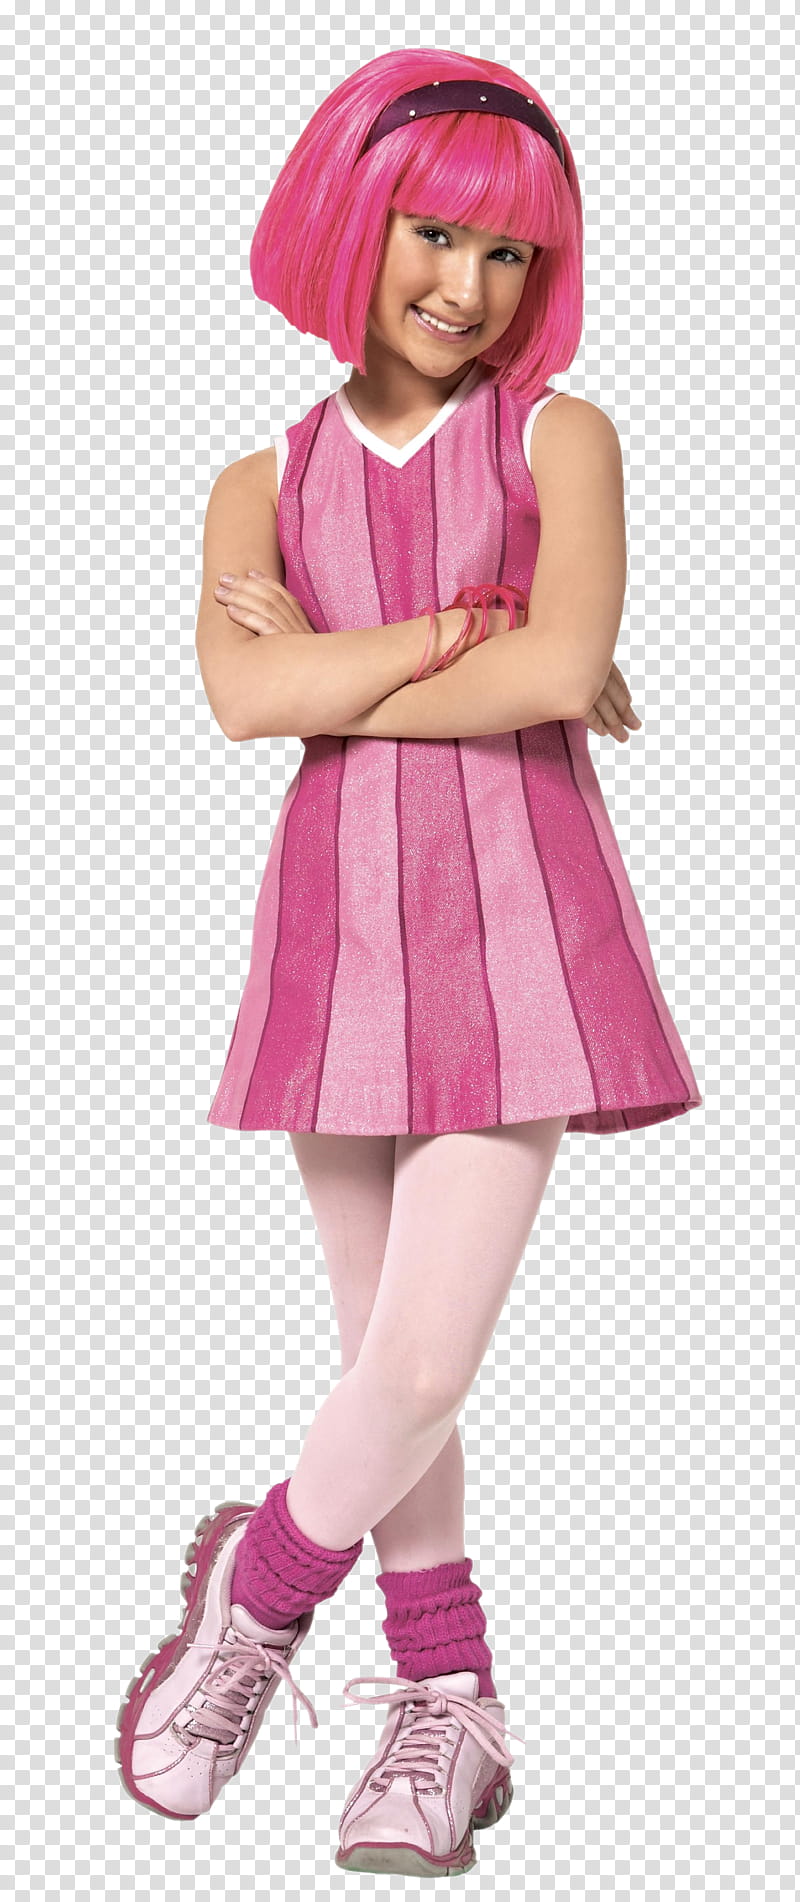 Stephanie LazyTown poses HQ transparent background PNG clipart